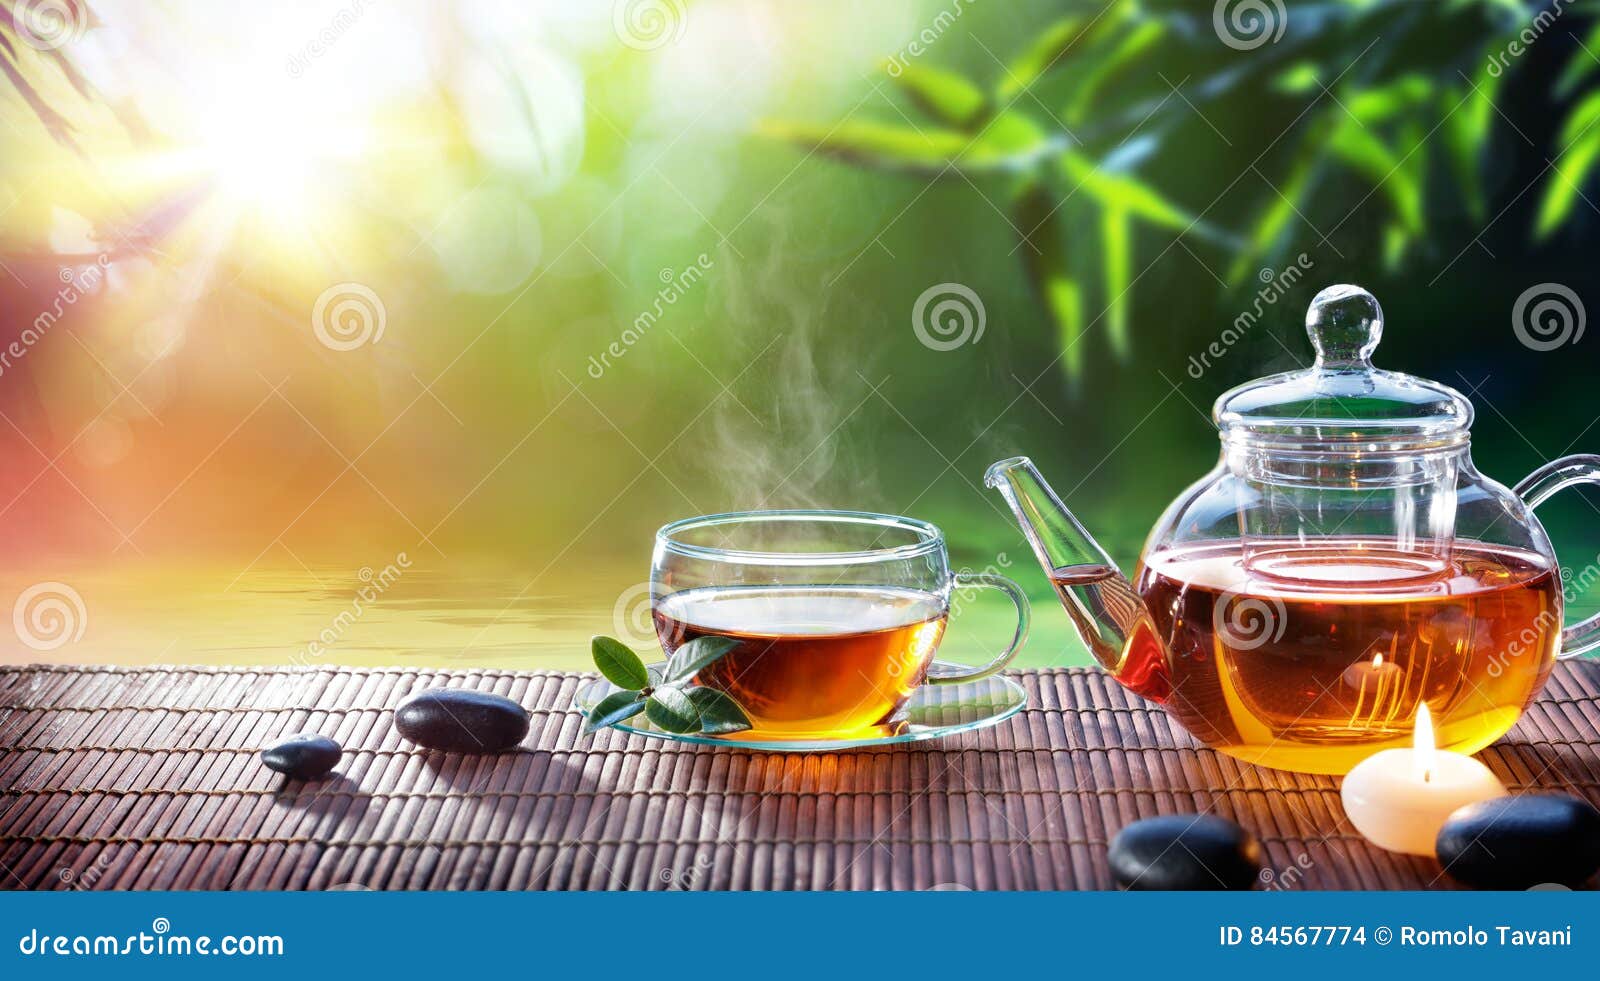 teatime - relax with hot tea